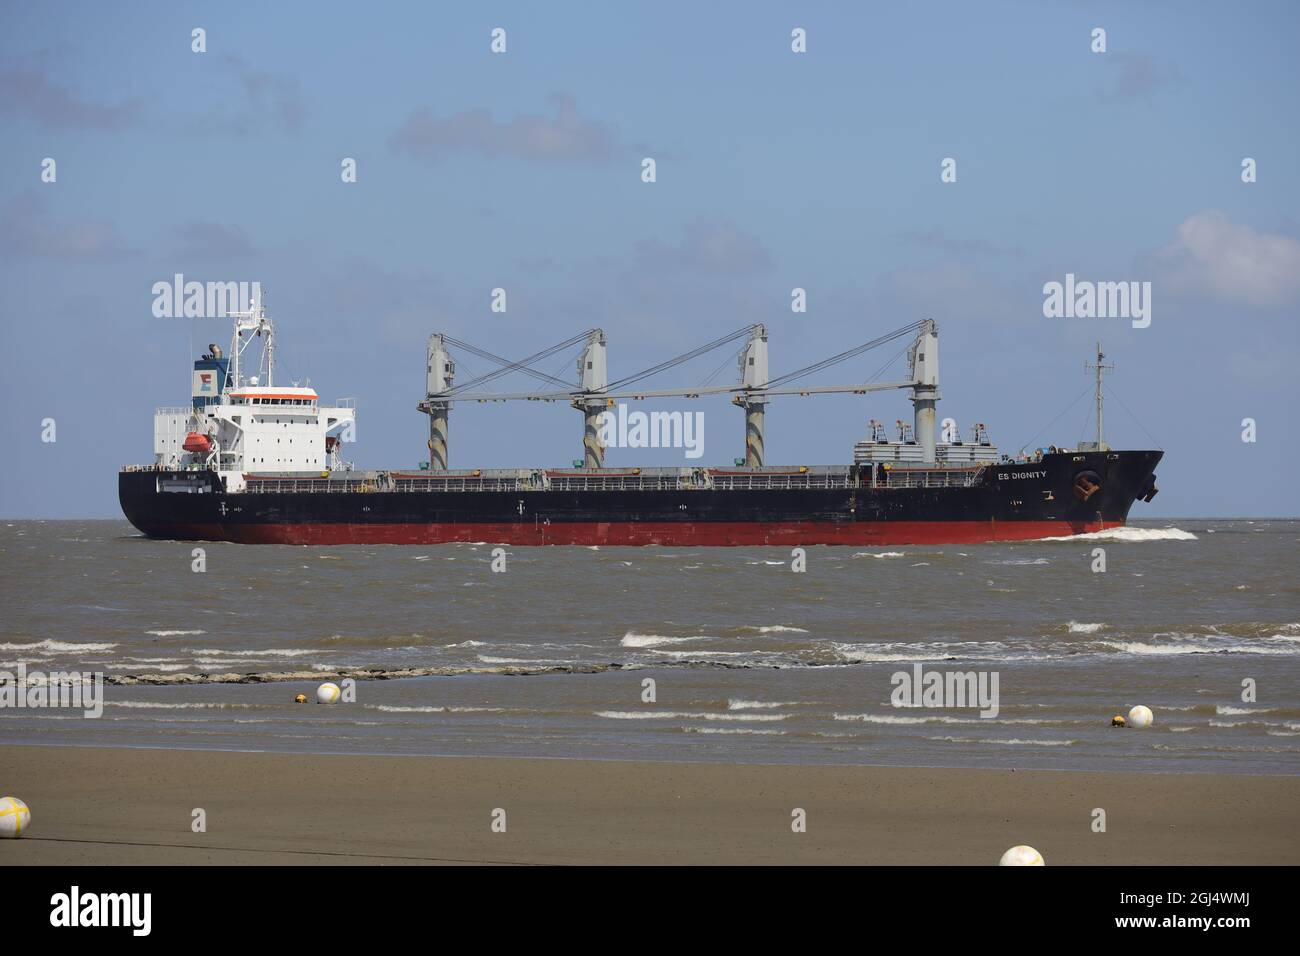 The bulk carrier ES Dignity will pass Cuxhaven on June 13, 2021 on its way to Brunsbüttel. Stock Photo